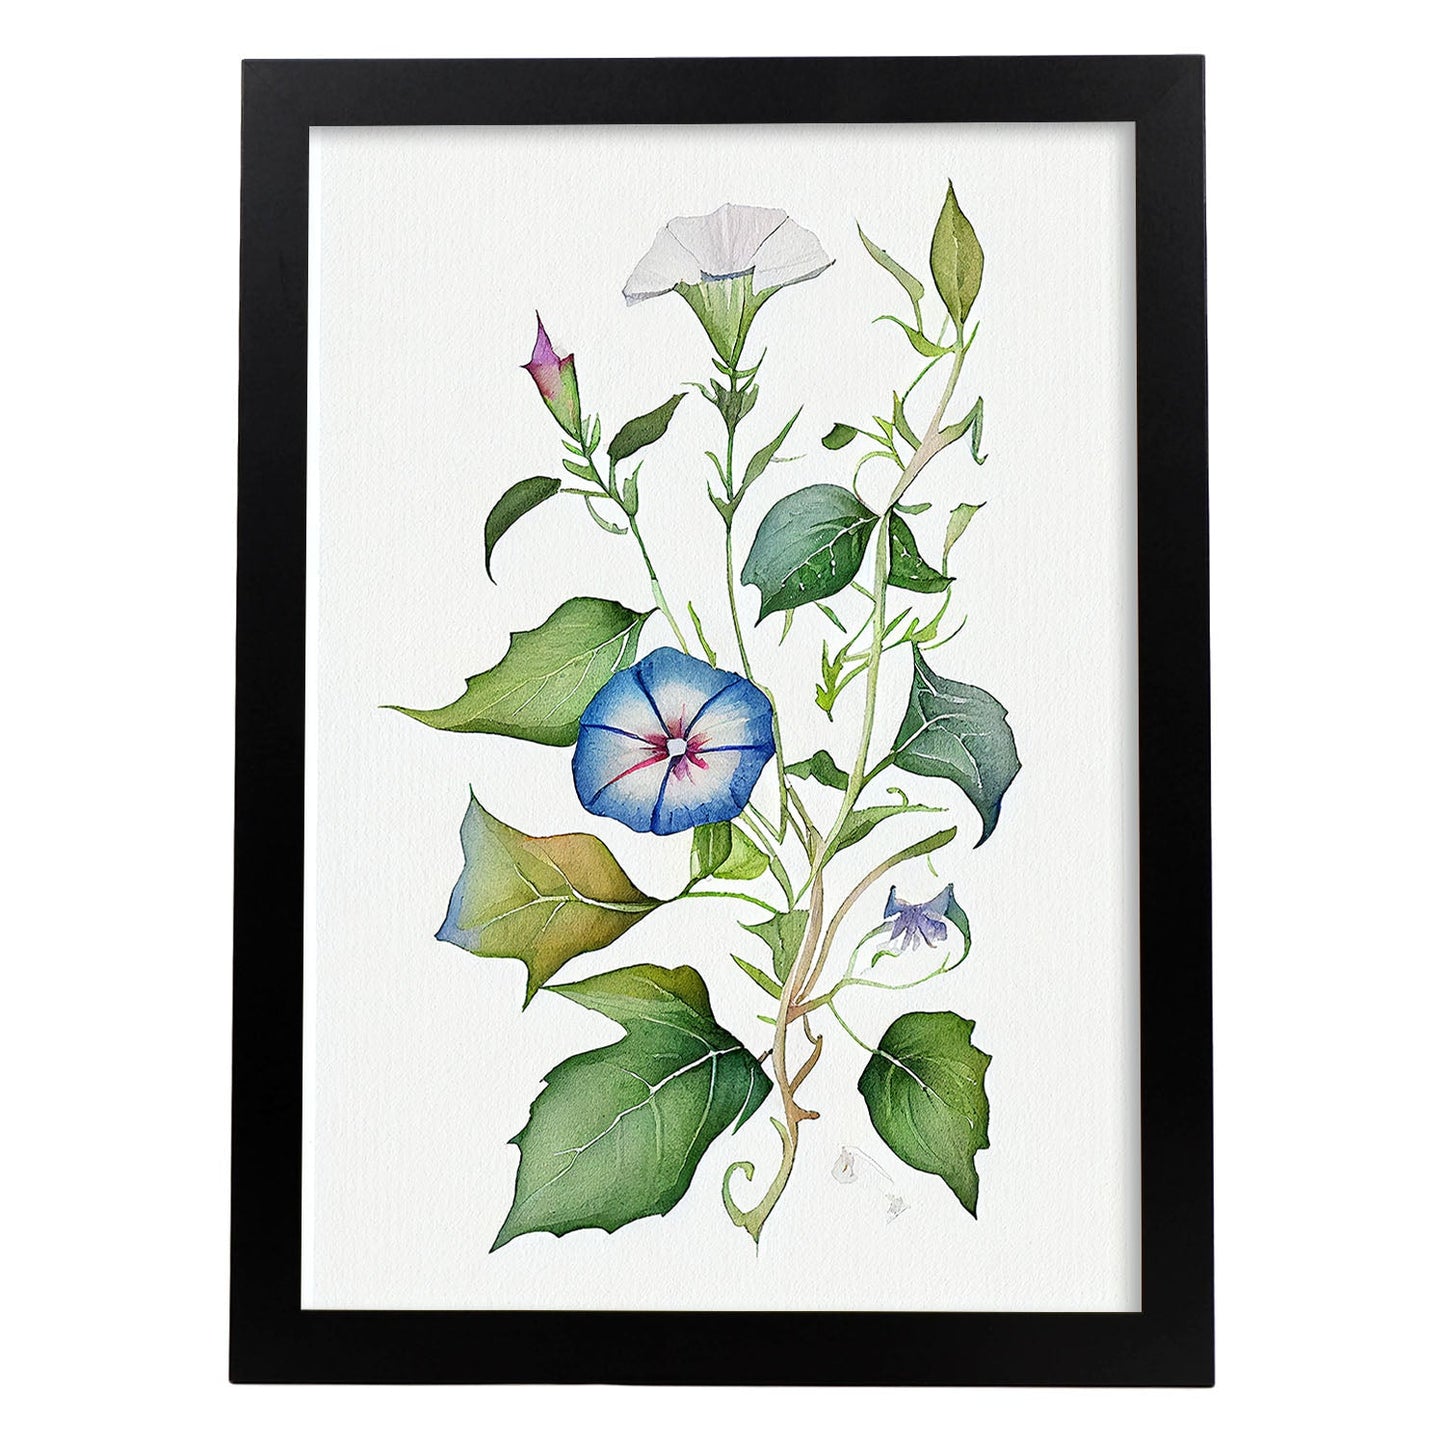 Nacnic watercolor minmal Morning Glory_2. Aesthetic Wall Art Prints for Bedroom or Living Room Design.